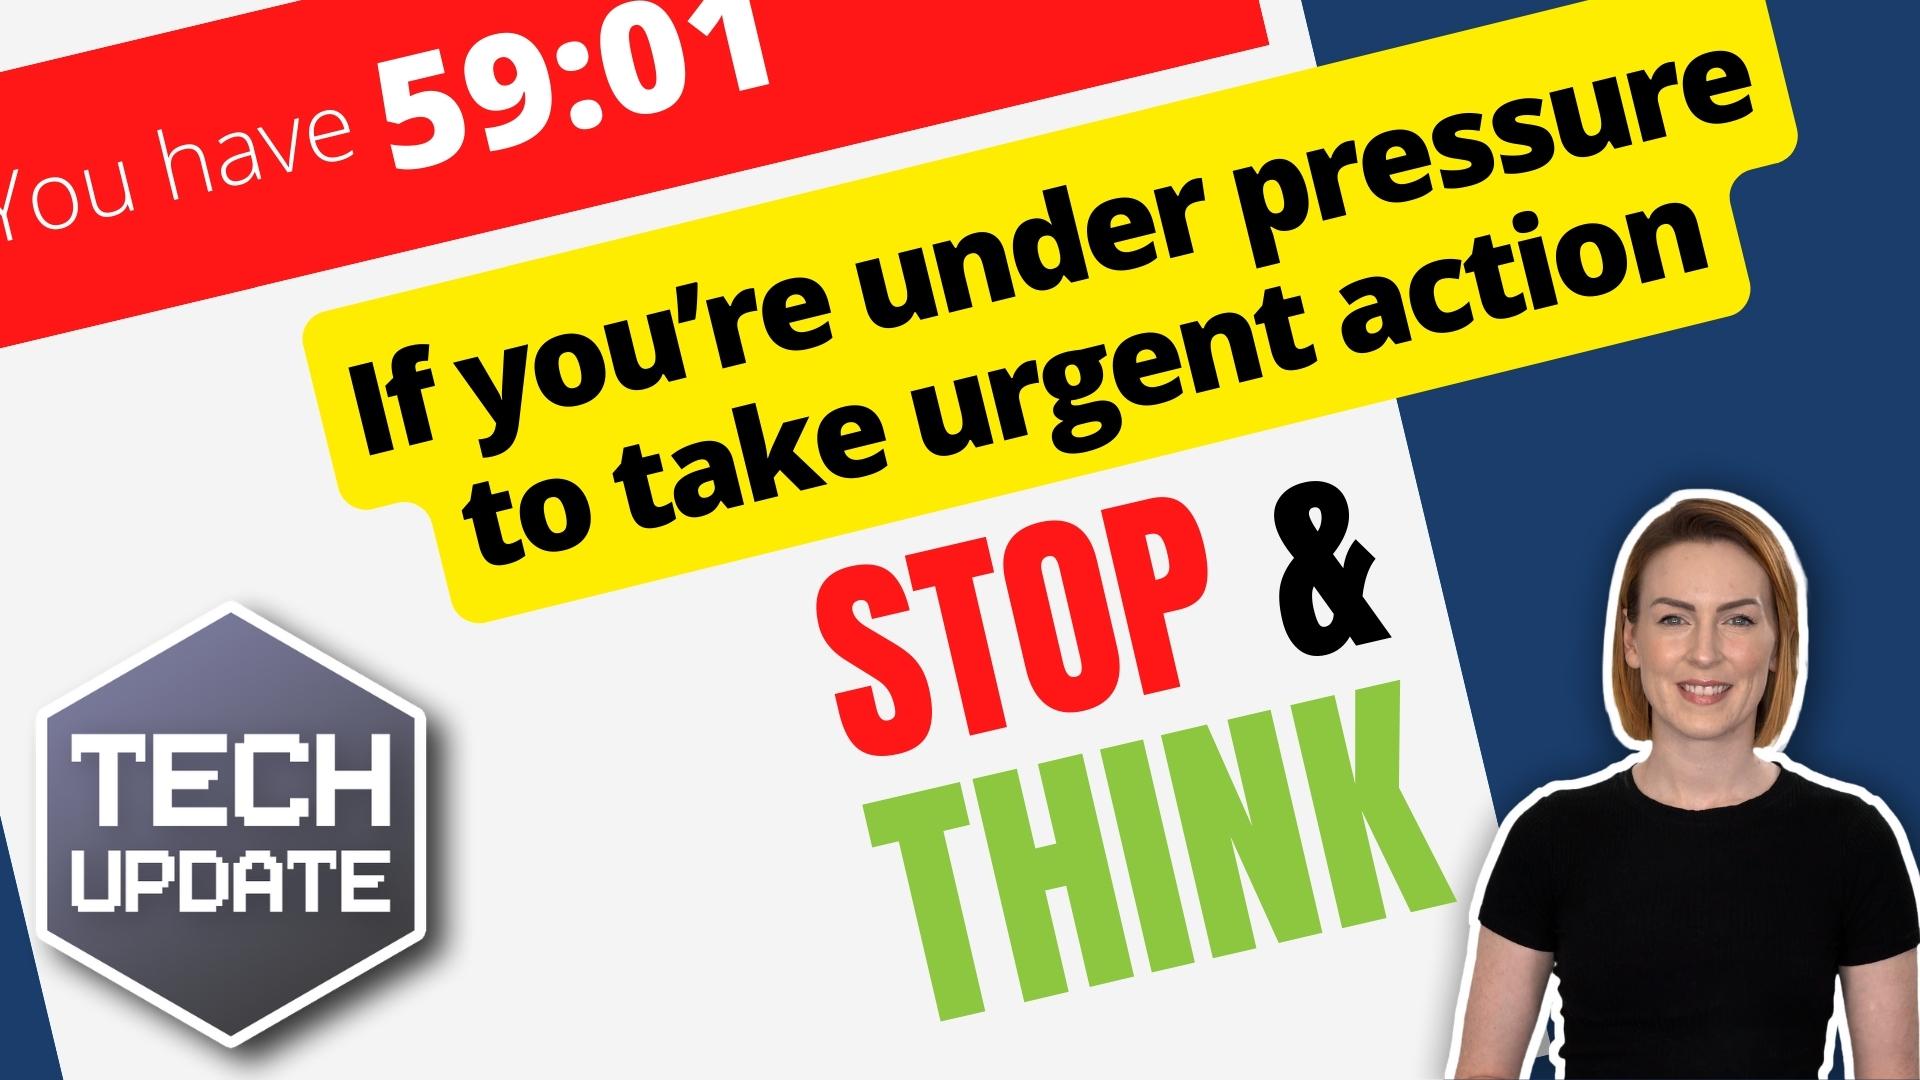 If you’re under pressure to take urgent action – stop and think